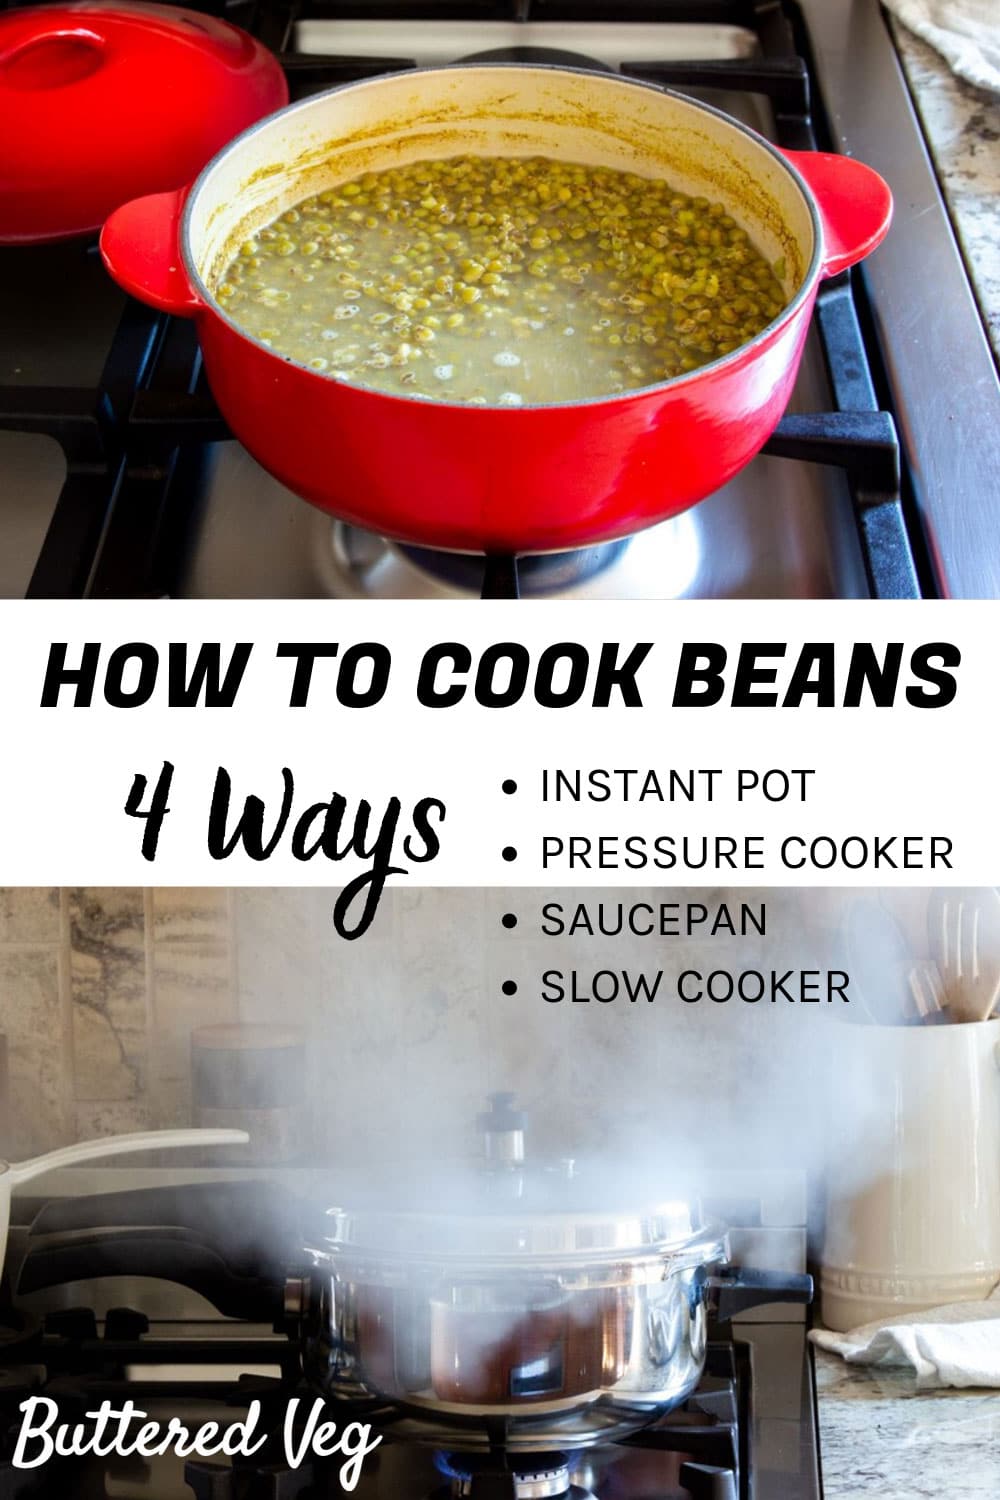 How To Cook Beans From Scratch (4 Ways)